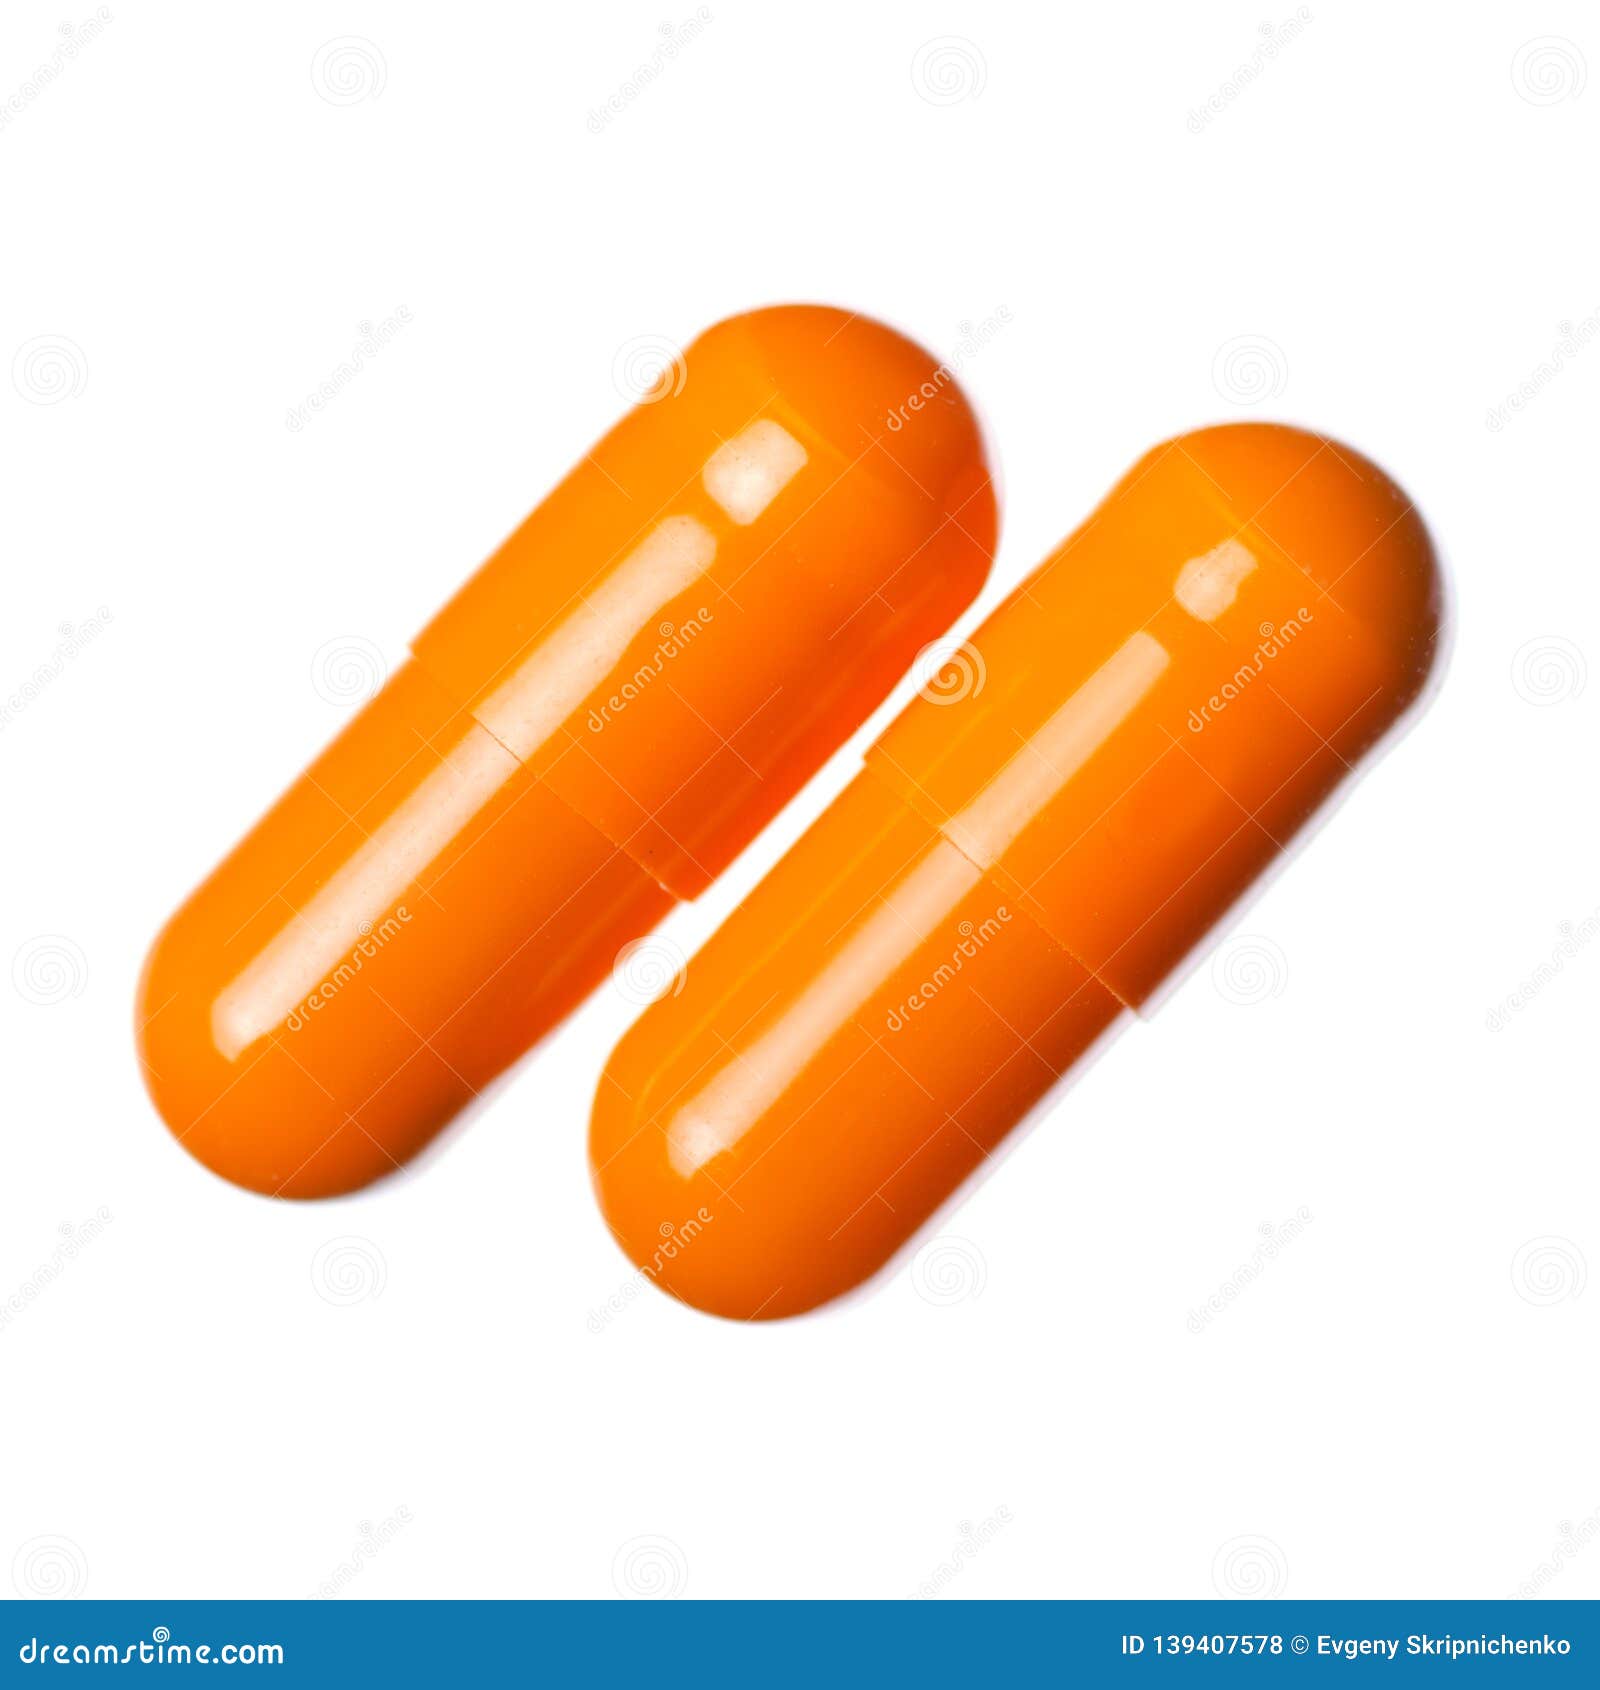 All 93+ Images what kind of pill is an orange capsule Sharp